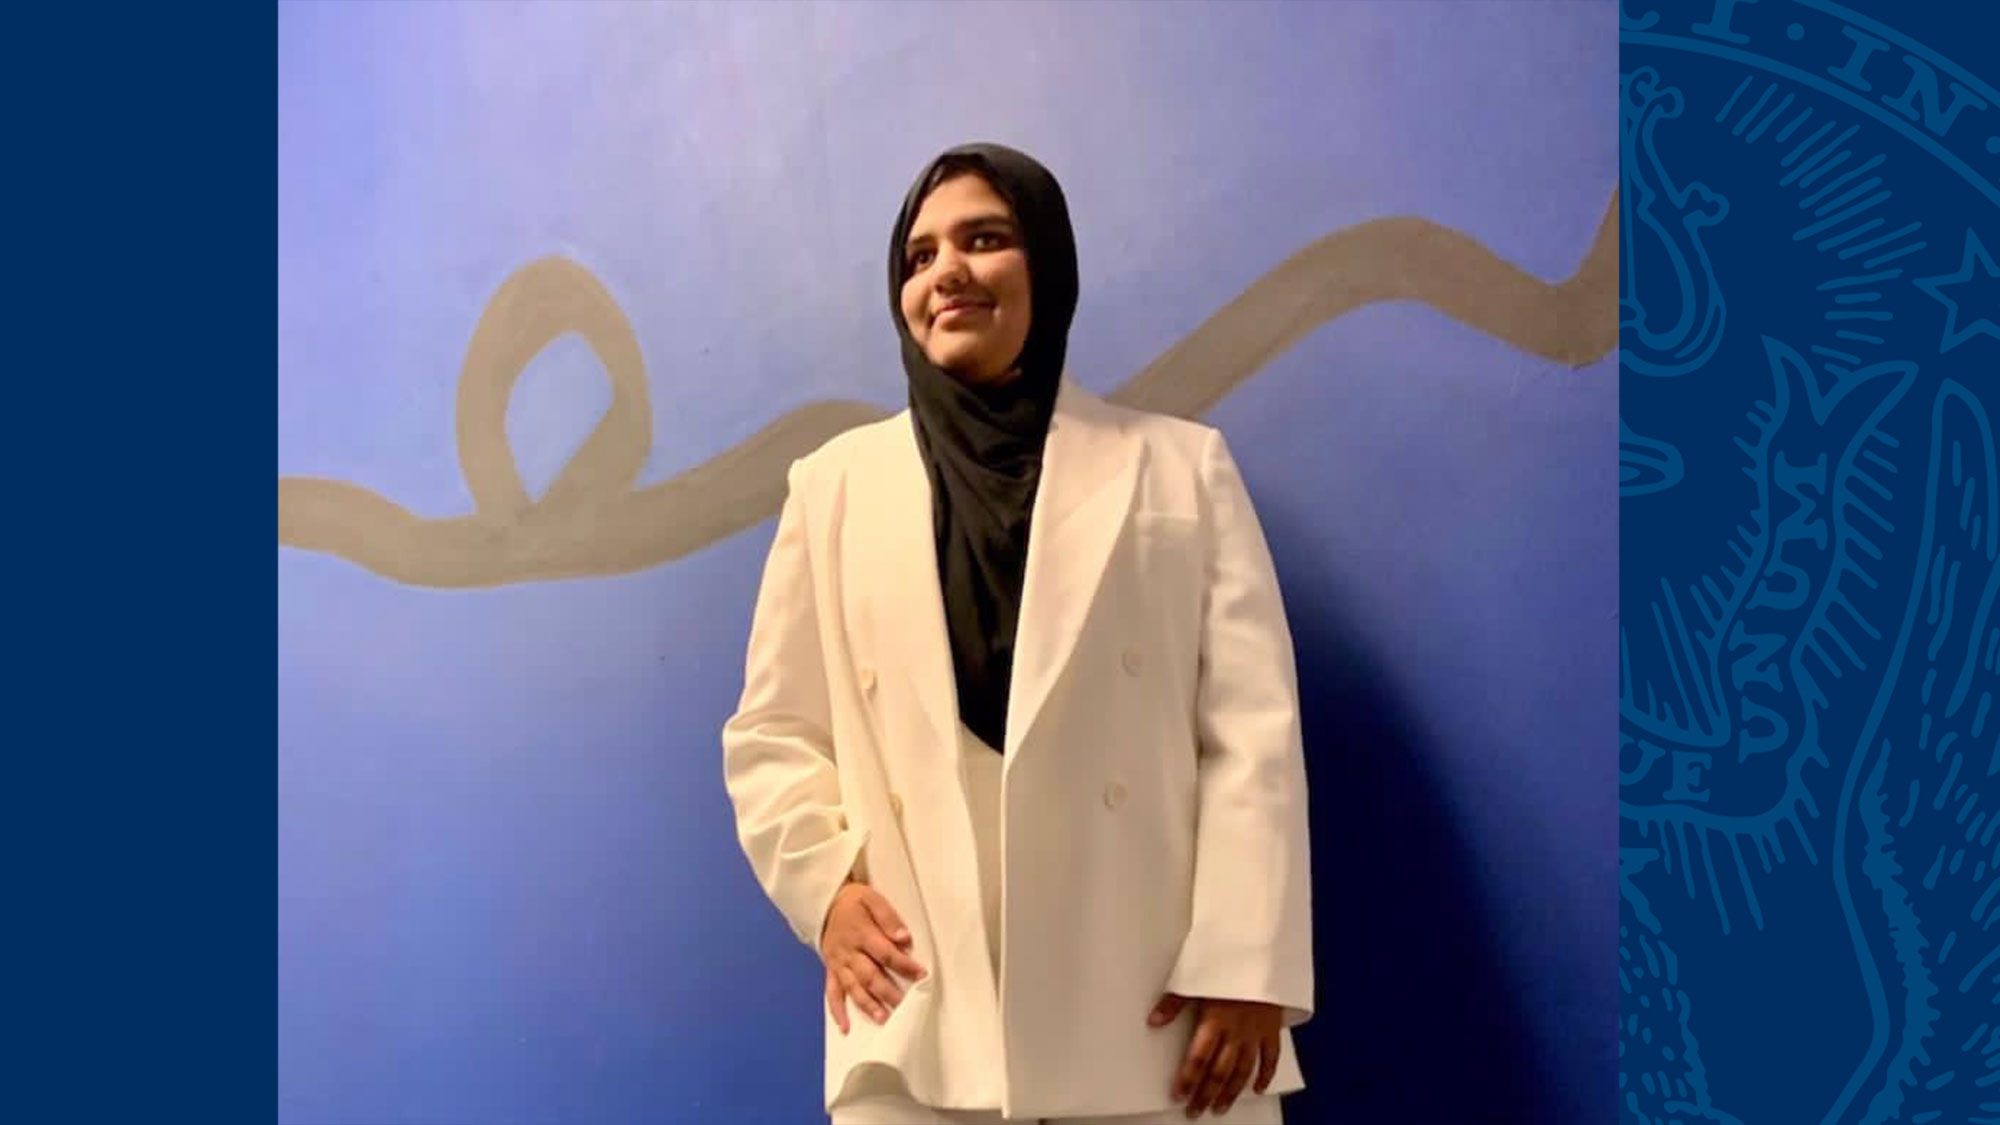 Khansa Maria stands against a wall wearing a white suit and black hijab.